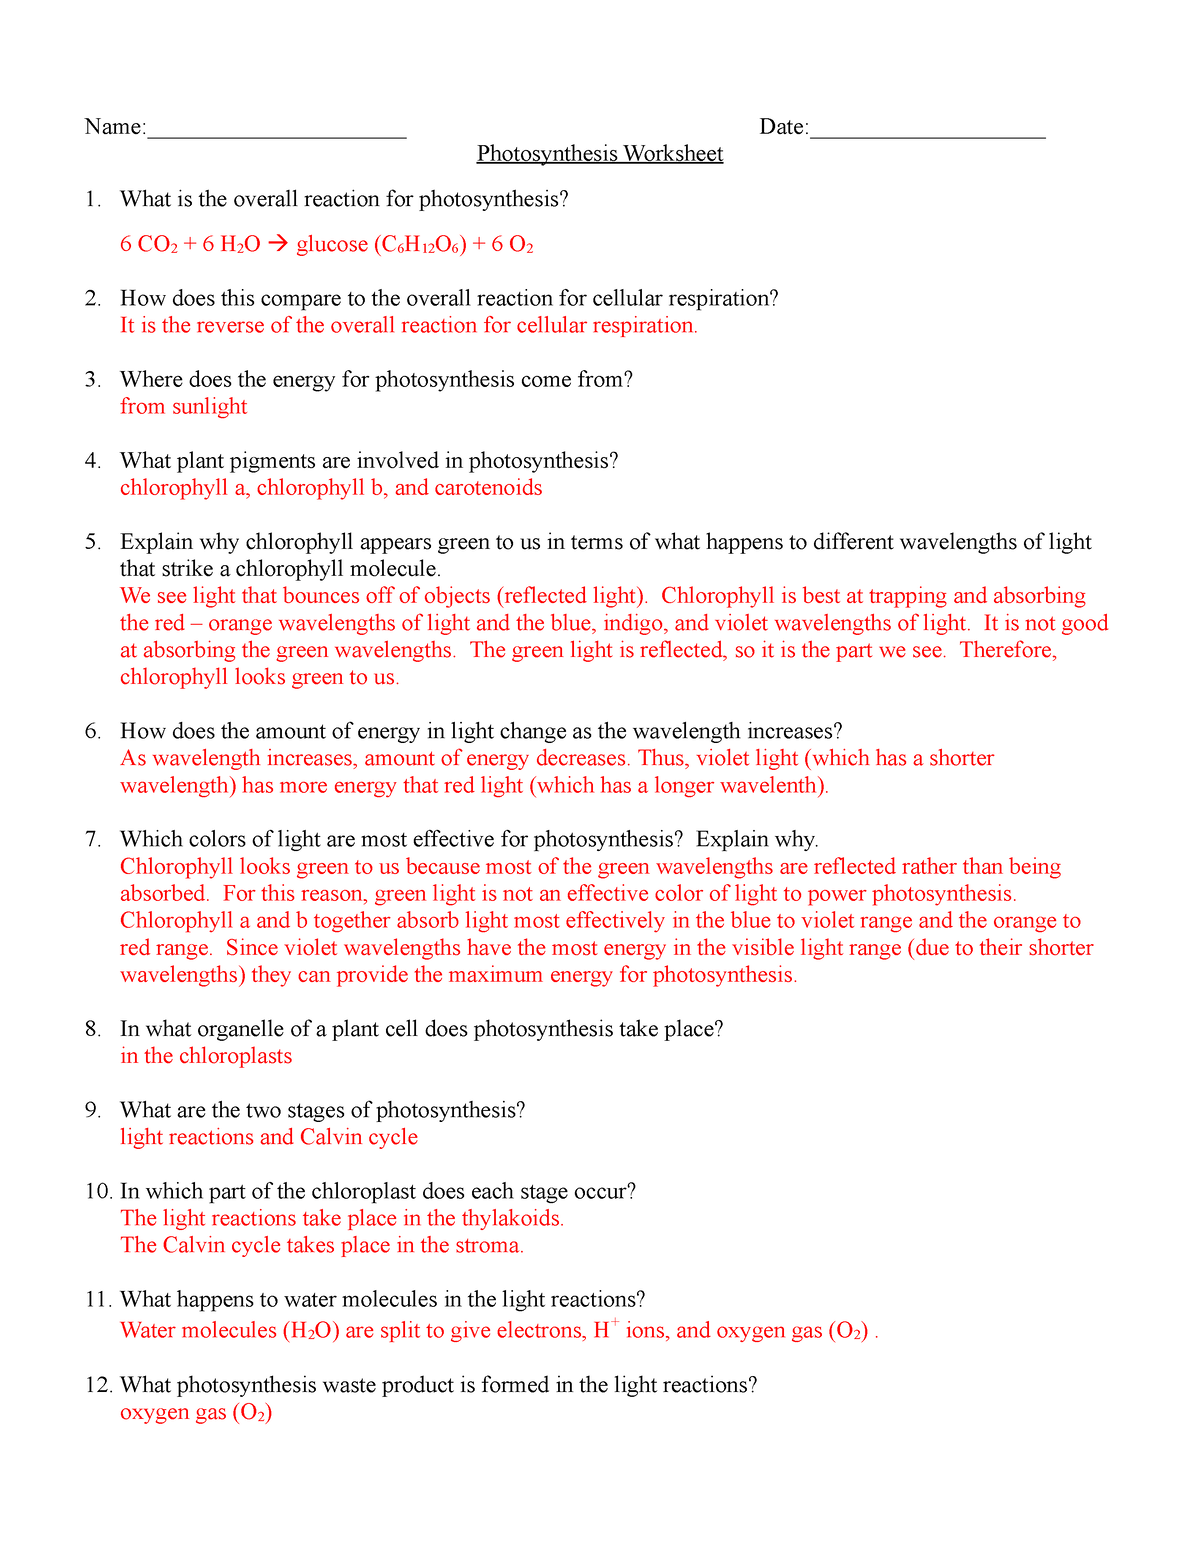 Photosynthesis Worksheet answers - Name: Date: - Studocu